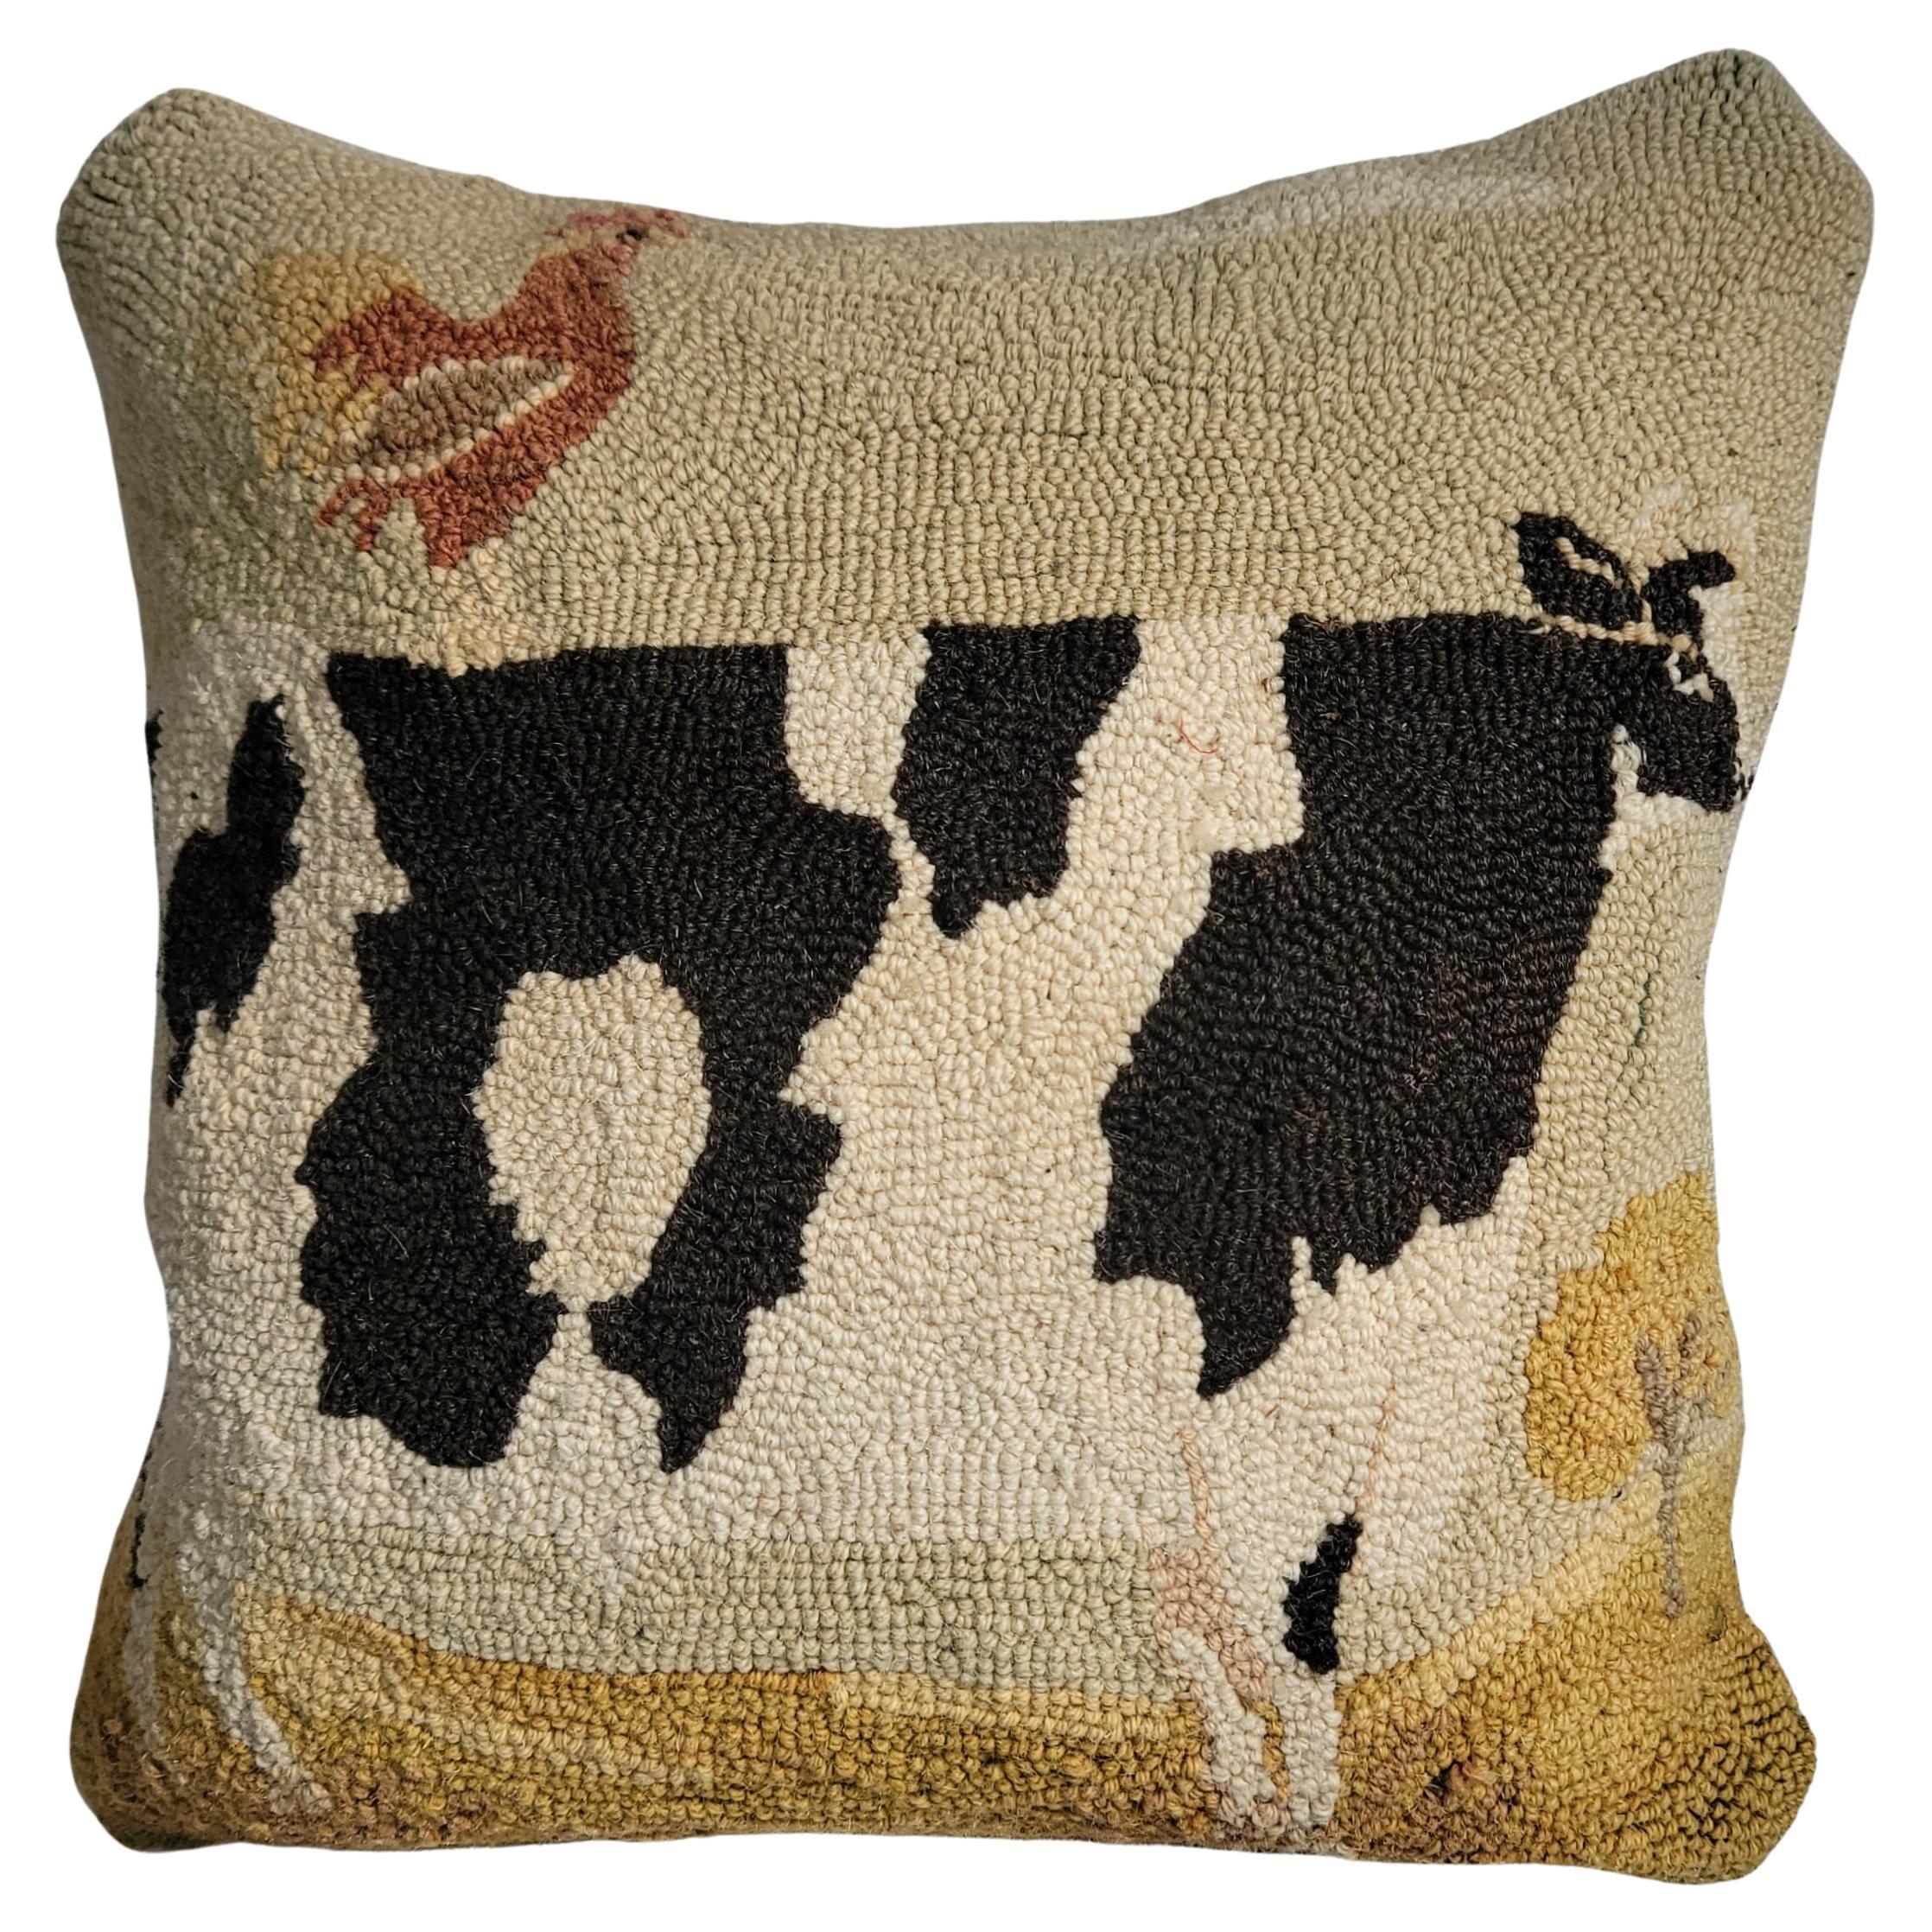 Hand Hooked Cow Rug Pillow w/ Leather Backing